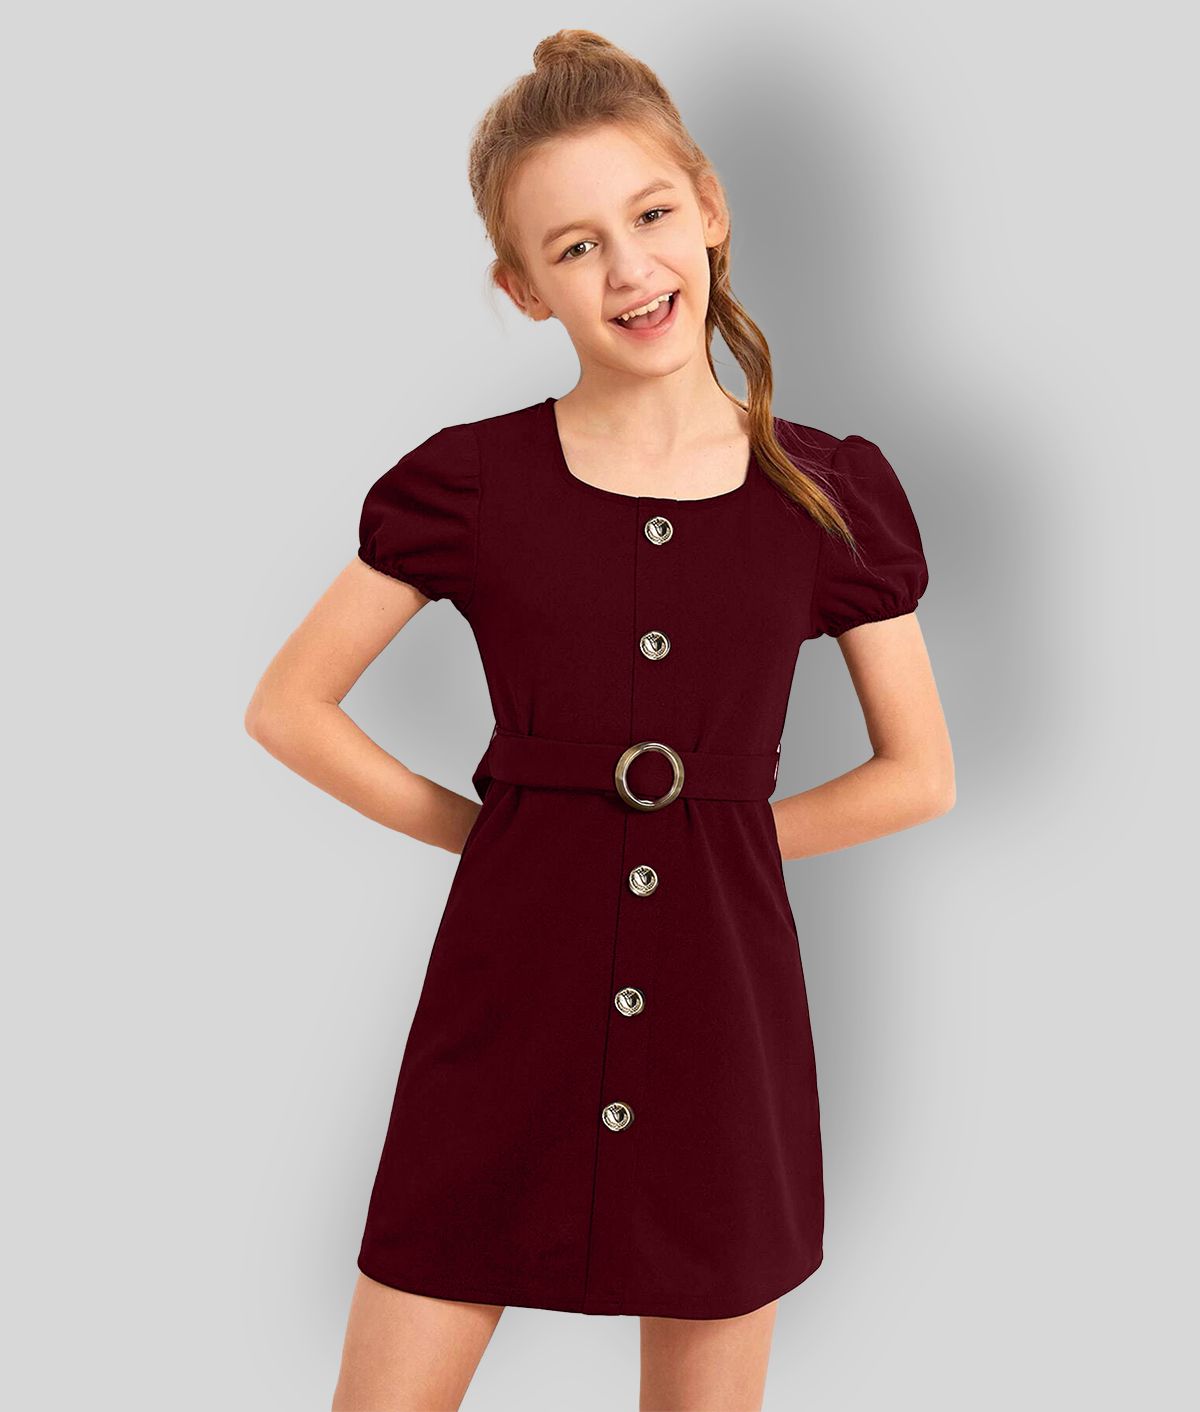     			Addyvero Maroon Cotton Blend Girls A-line Dress ( Pack of 1 )